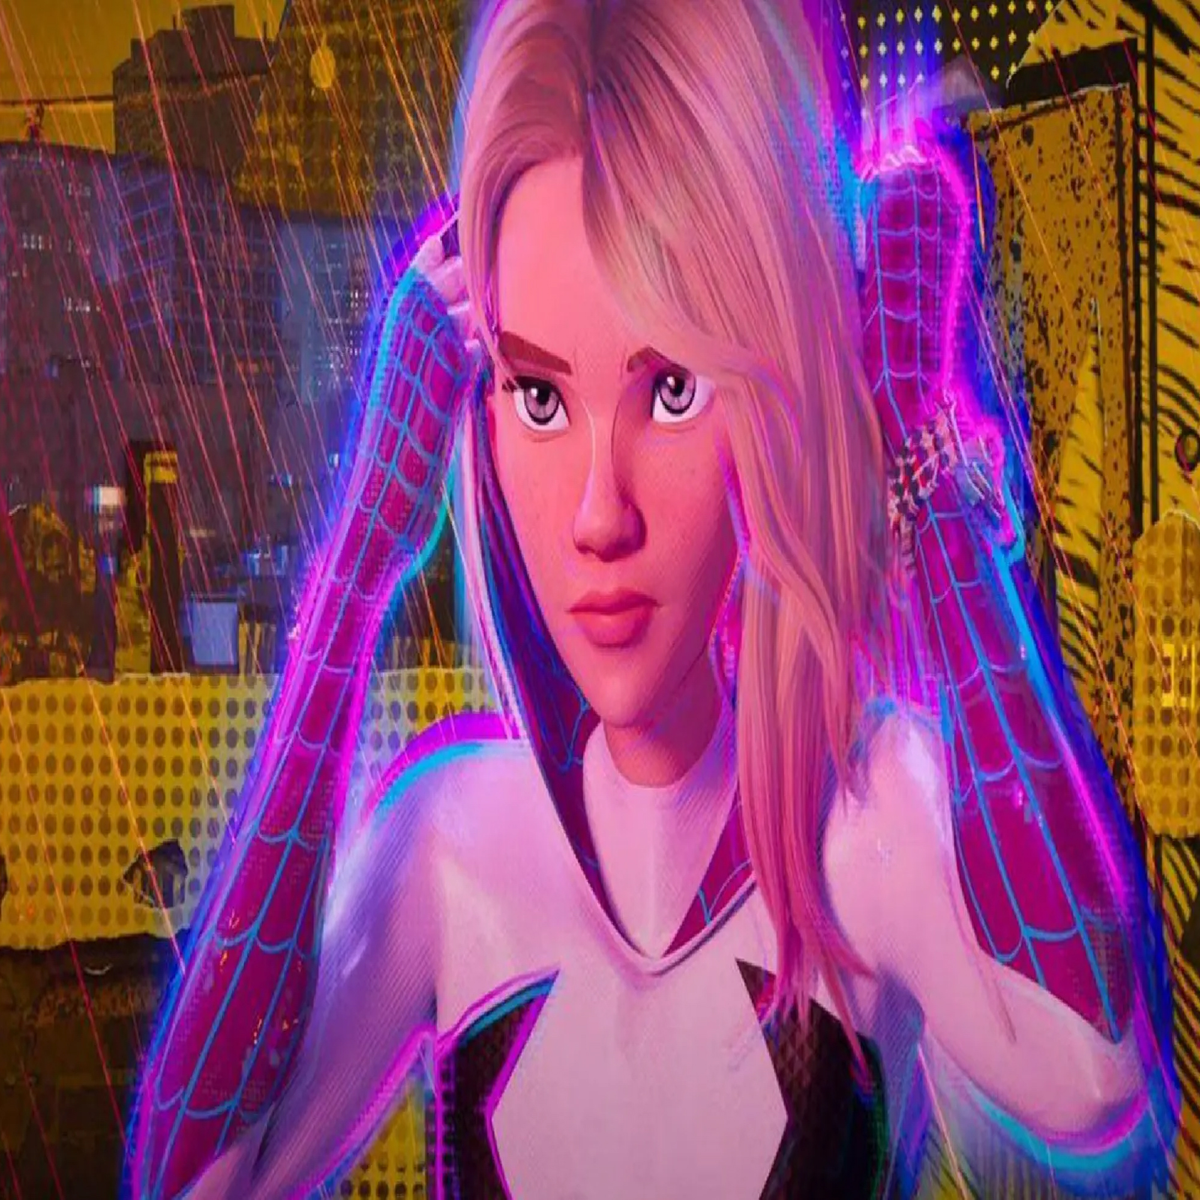 Spider-gwen's appearance is notable for her black and white